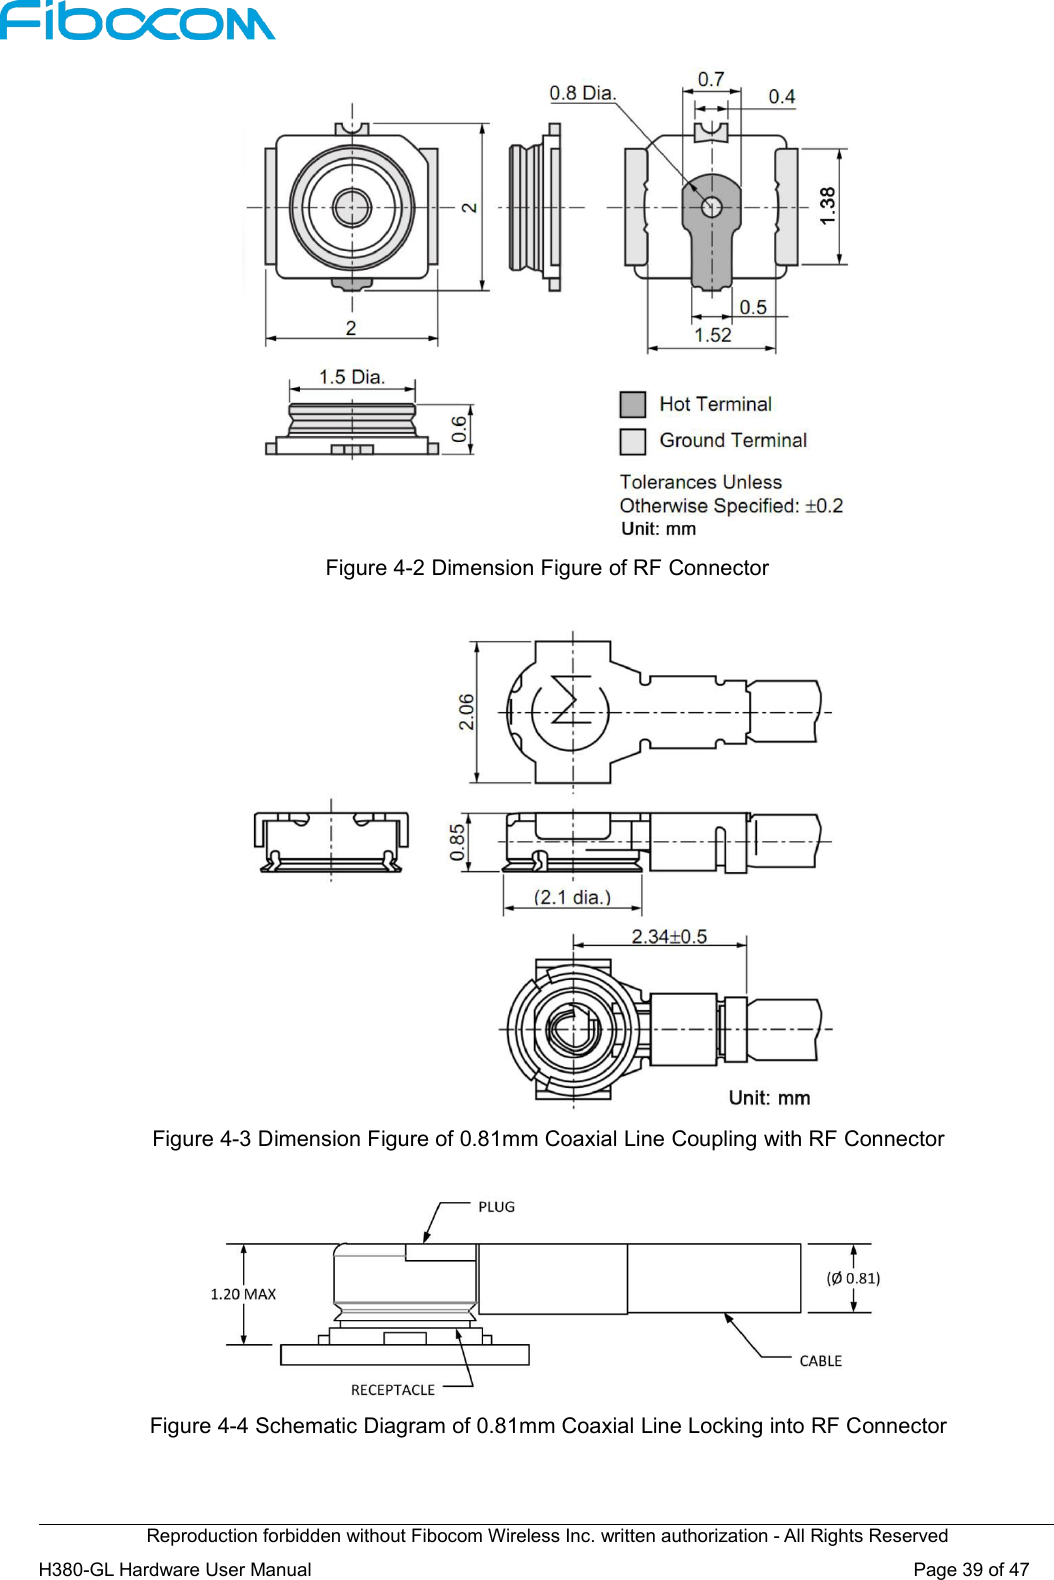 Reproduction forbidden without Fibocom Wireless Inc. written authorization - All Rights ReservedH380-GL Hardware User Manual Page39of47Figure 4-2 Dimension Figure of RF ConnectorFigure 4-3 Dimension Figure of 0.81mm Coaxial Line Coupling with RF ConnectorFigure 4-4 Schematic Diagram of 0.81mm Coaxial Line Locking into RF Connector